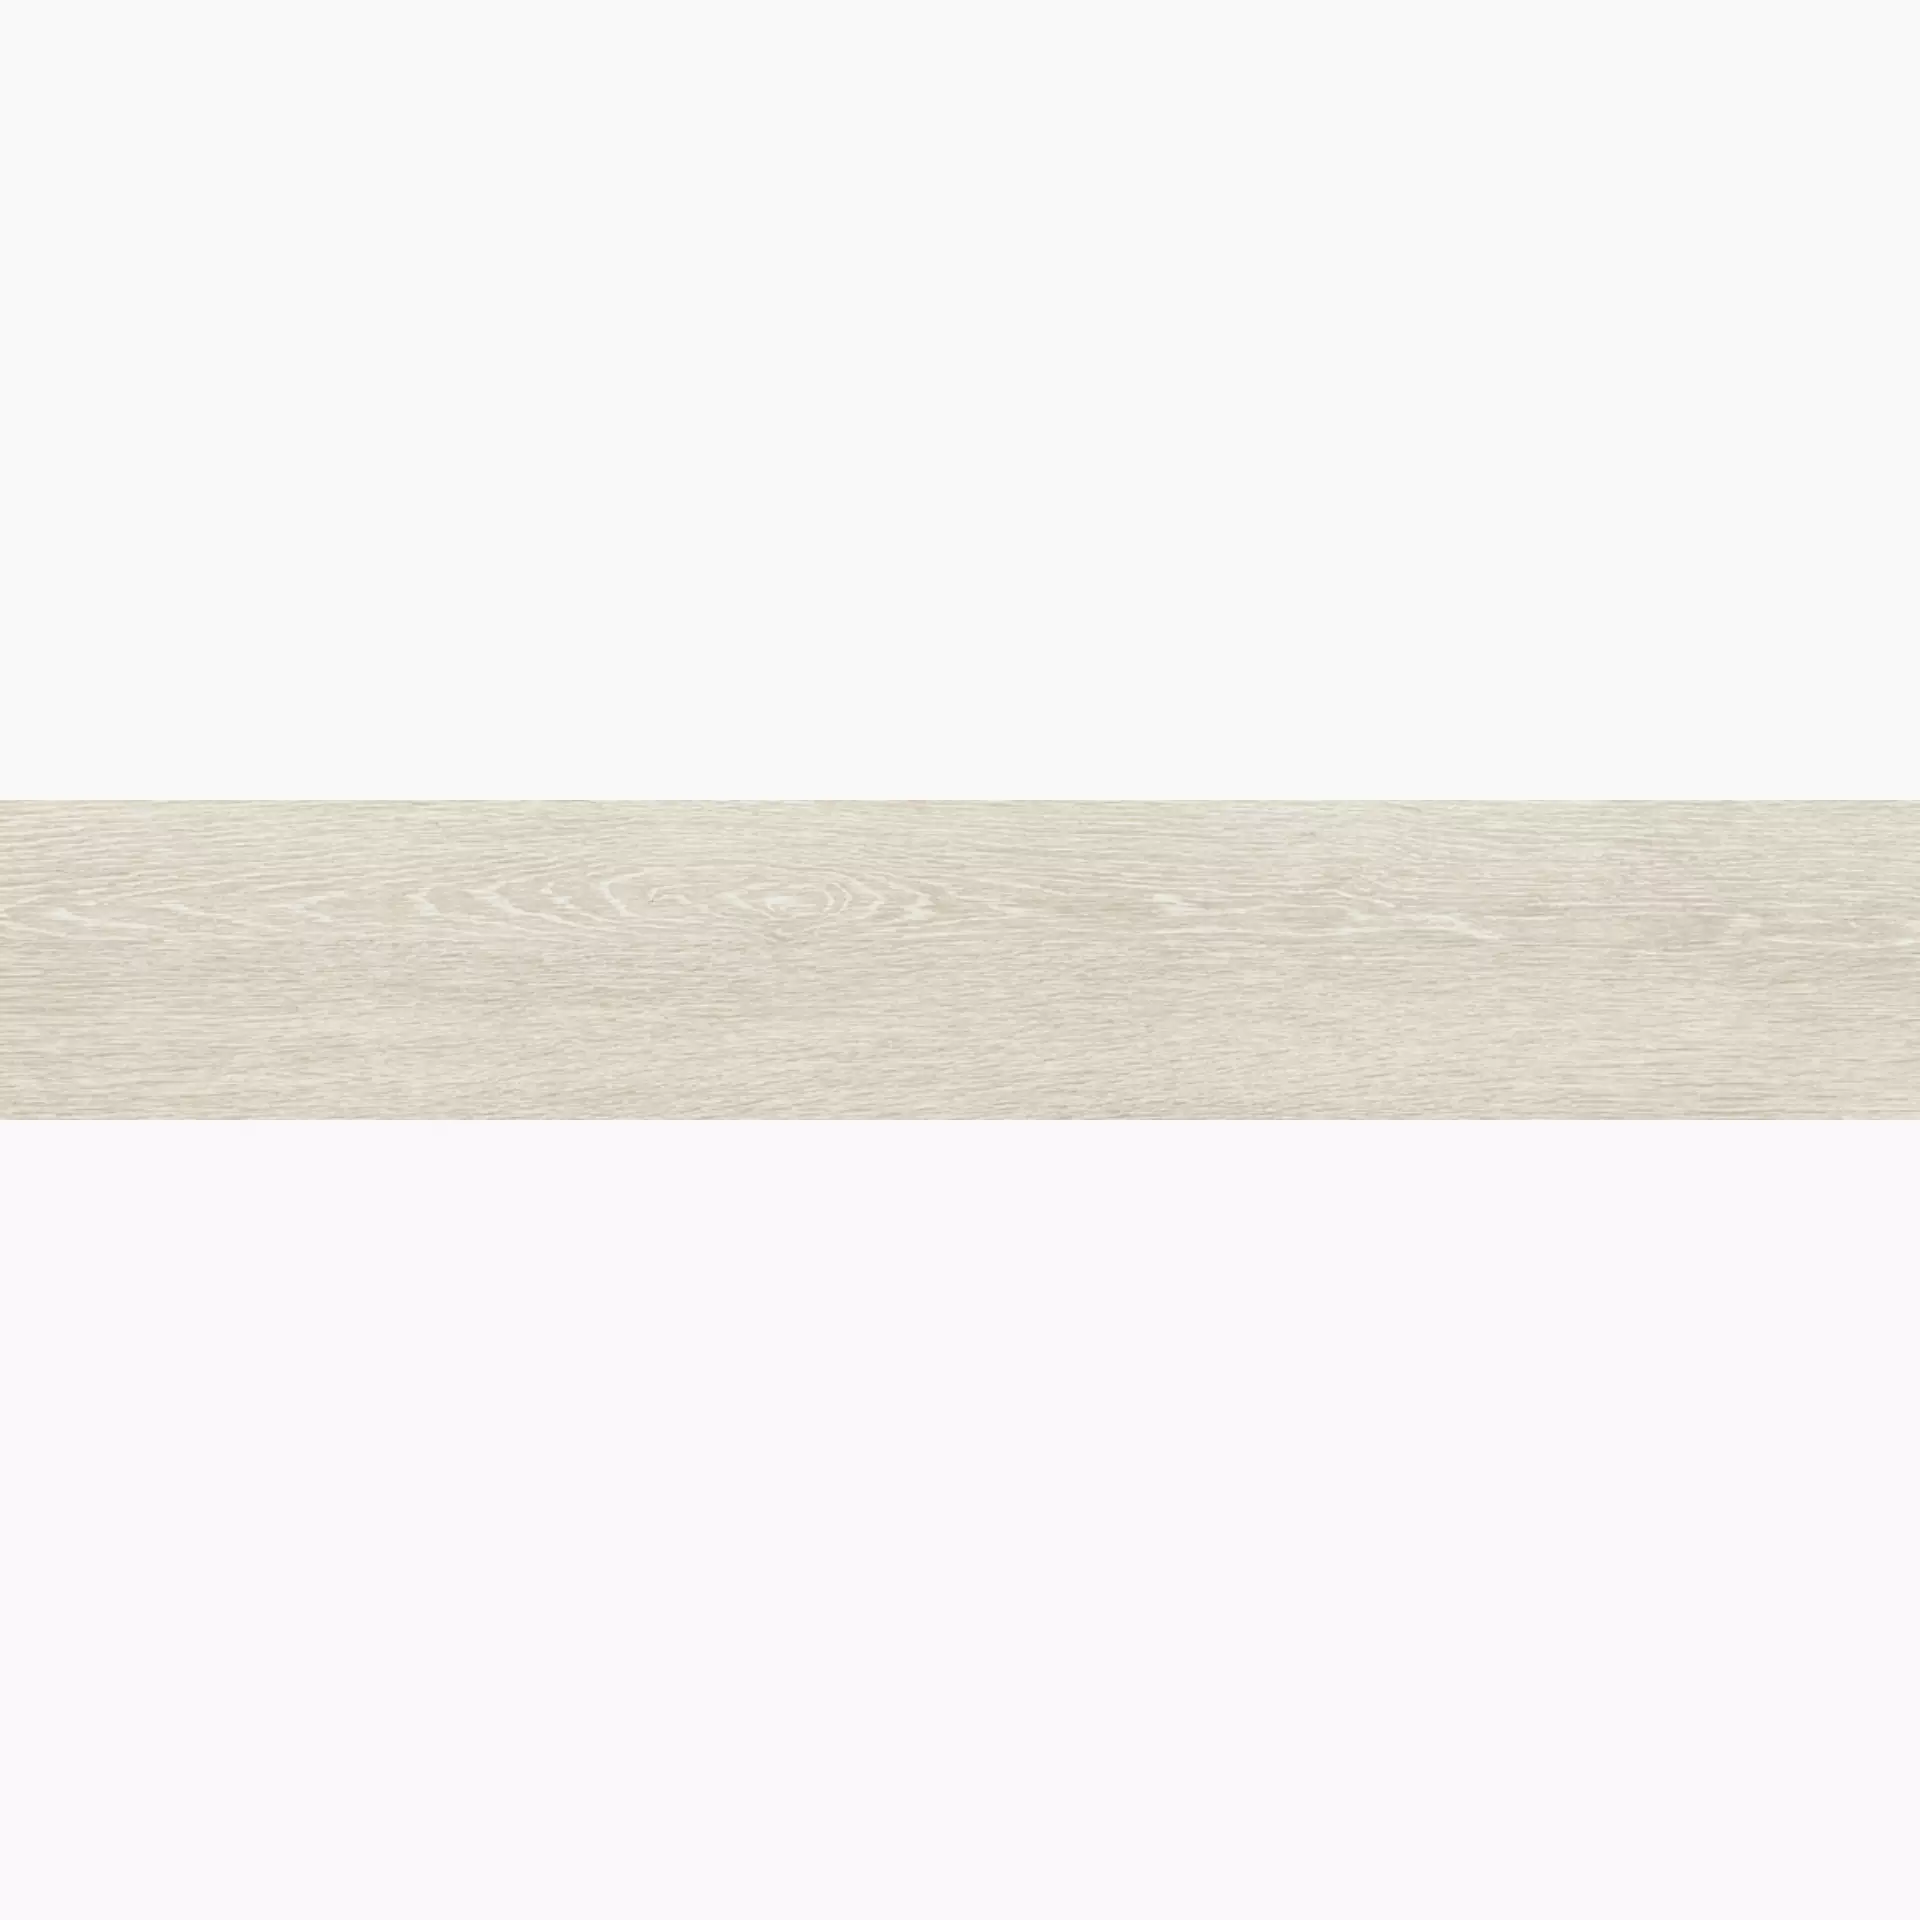 Ergon Tr3Nd Ivory Naturale E415 20x120cm rectified 9,5mm